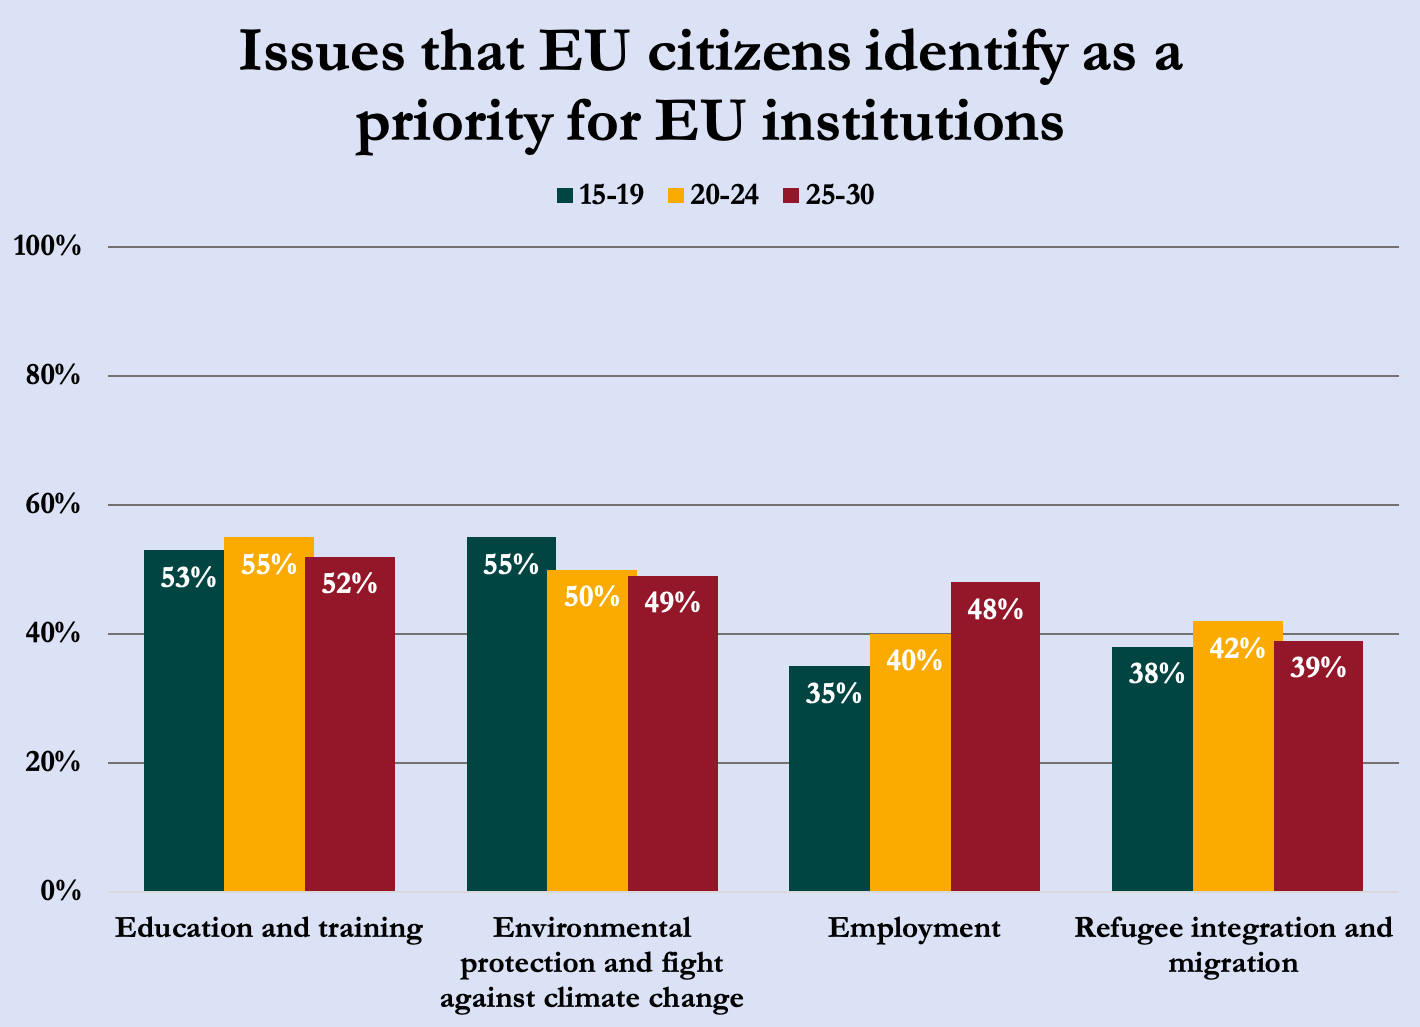 Opinions of EU citizens on priorities for EU institutions